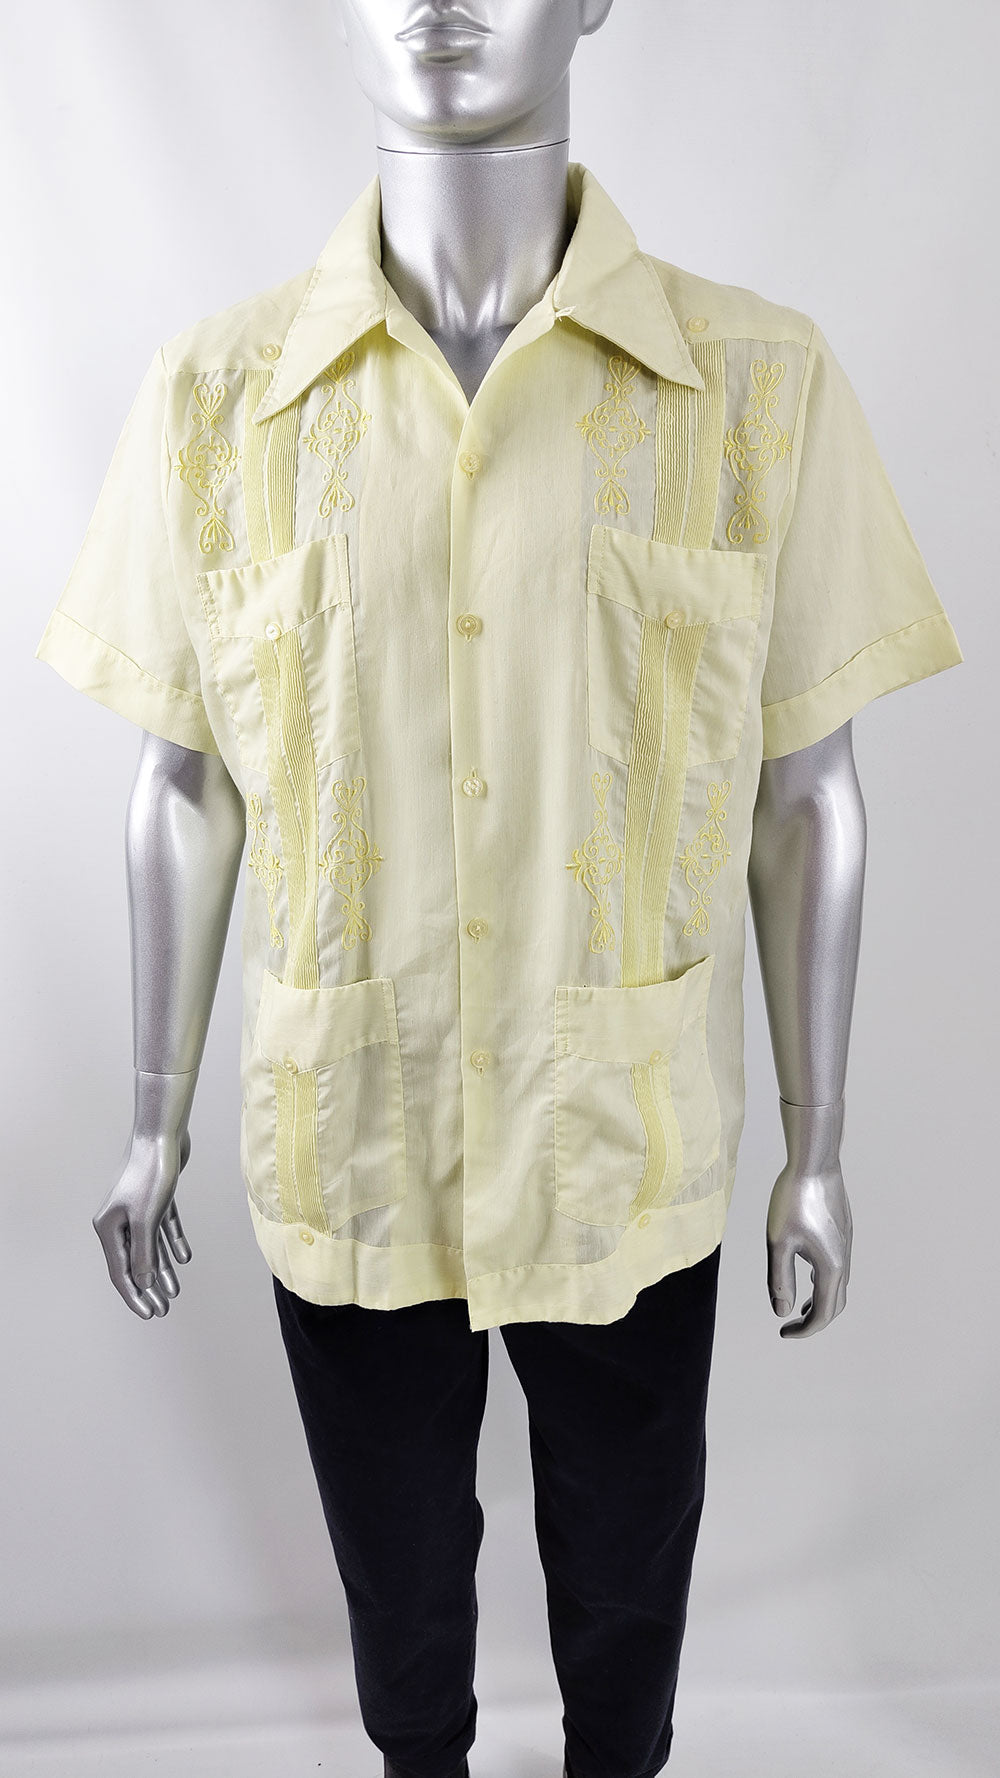 A vintage 70s rockabilly shirt for men in a size Large with four pockets on the front.